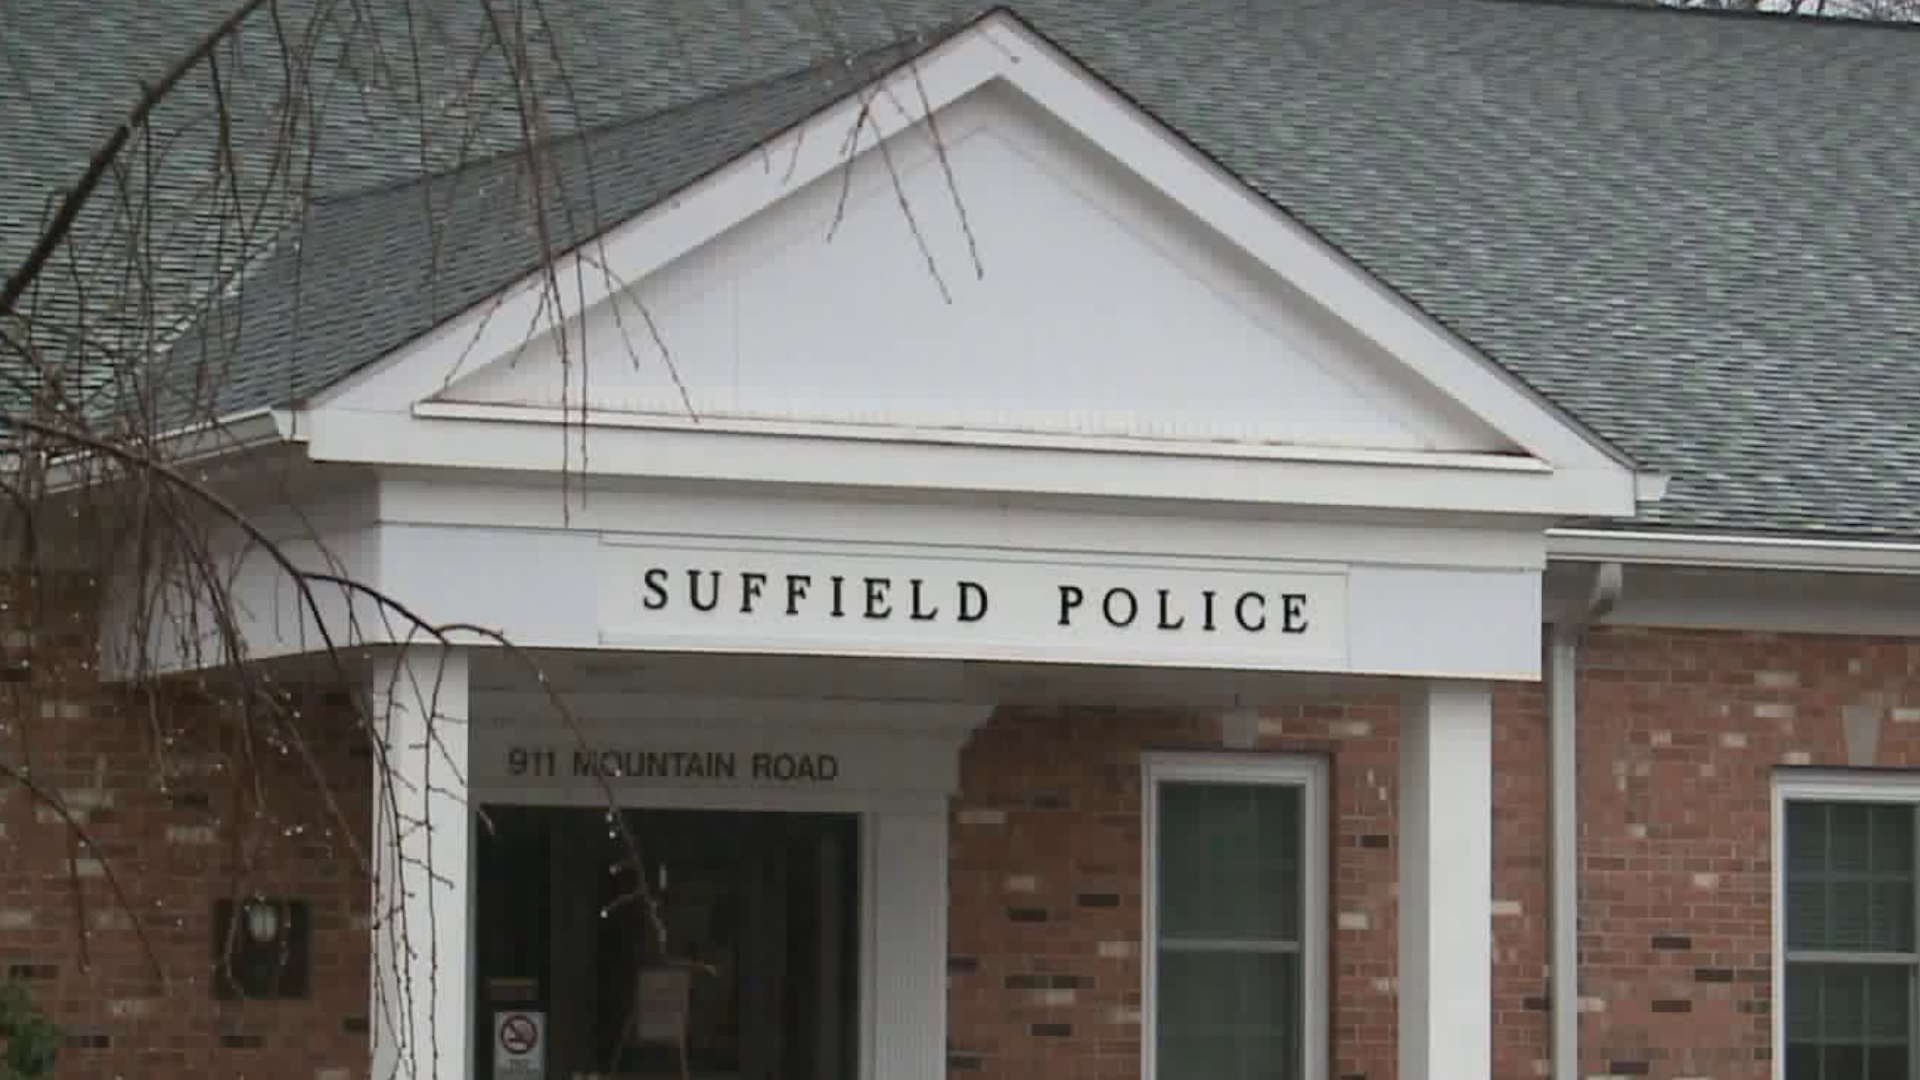 Suffield Police warn parents after suspicious male seen around neighborhood